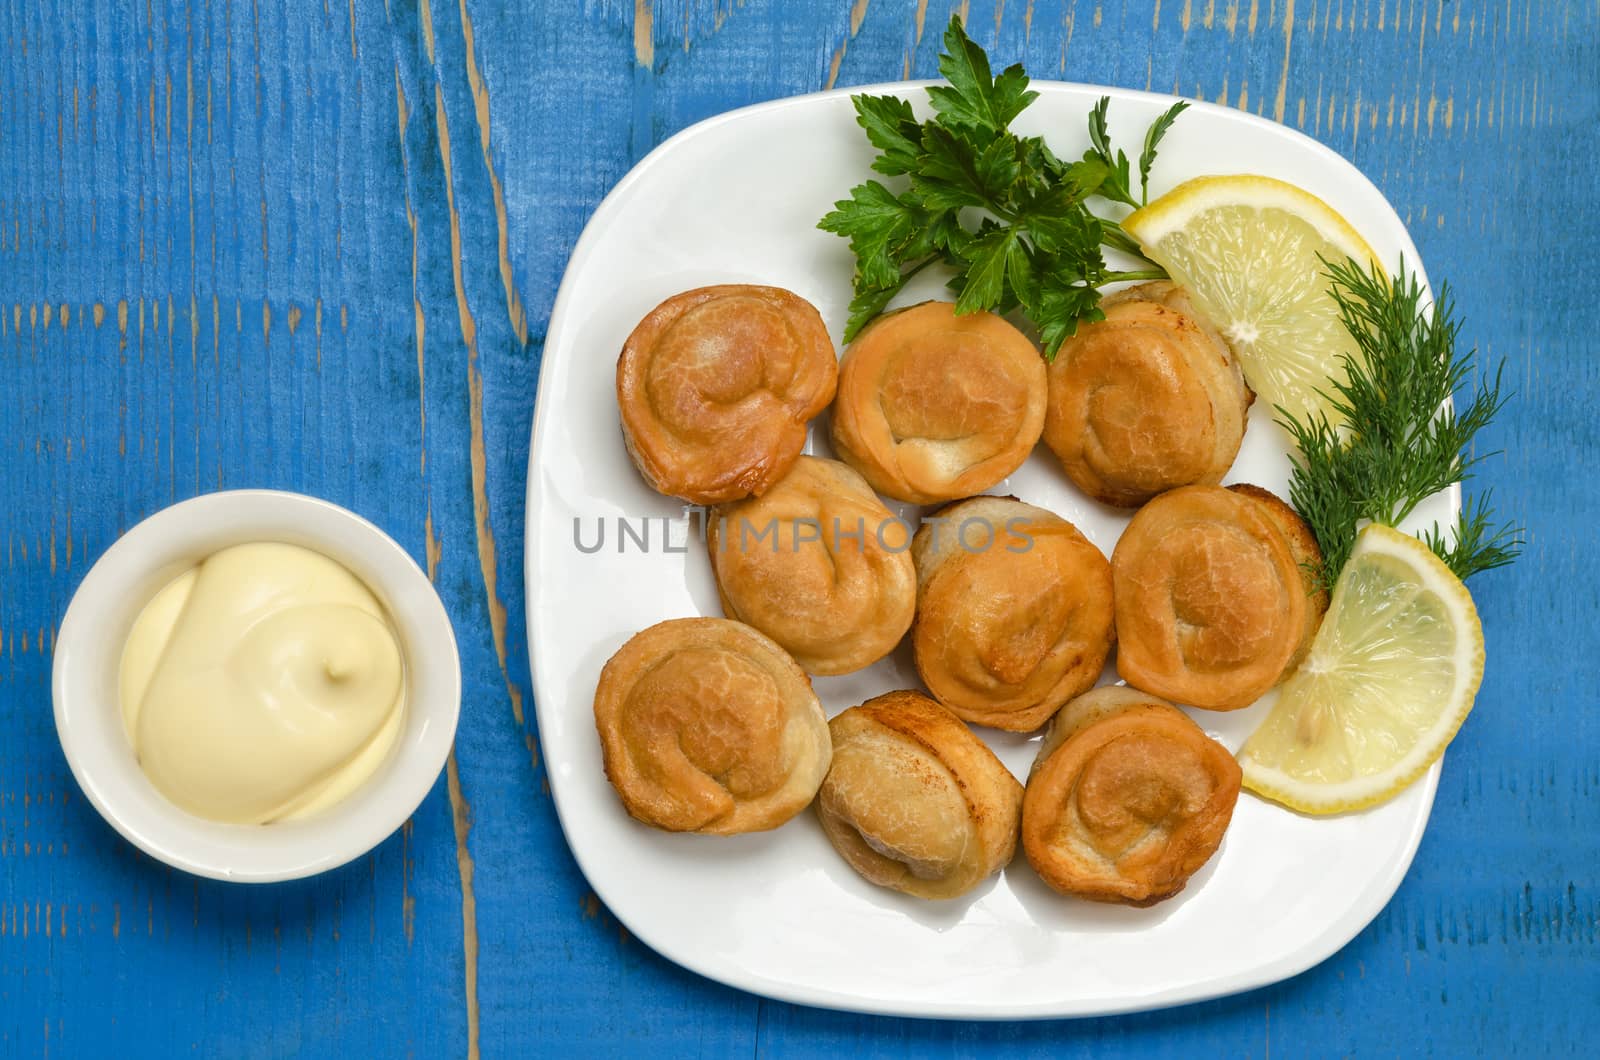 Fried dumplings on the plate with mayonnaise, herbs and lemon. by Gaina